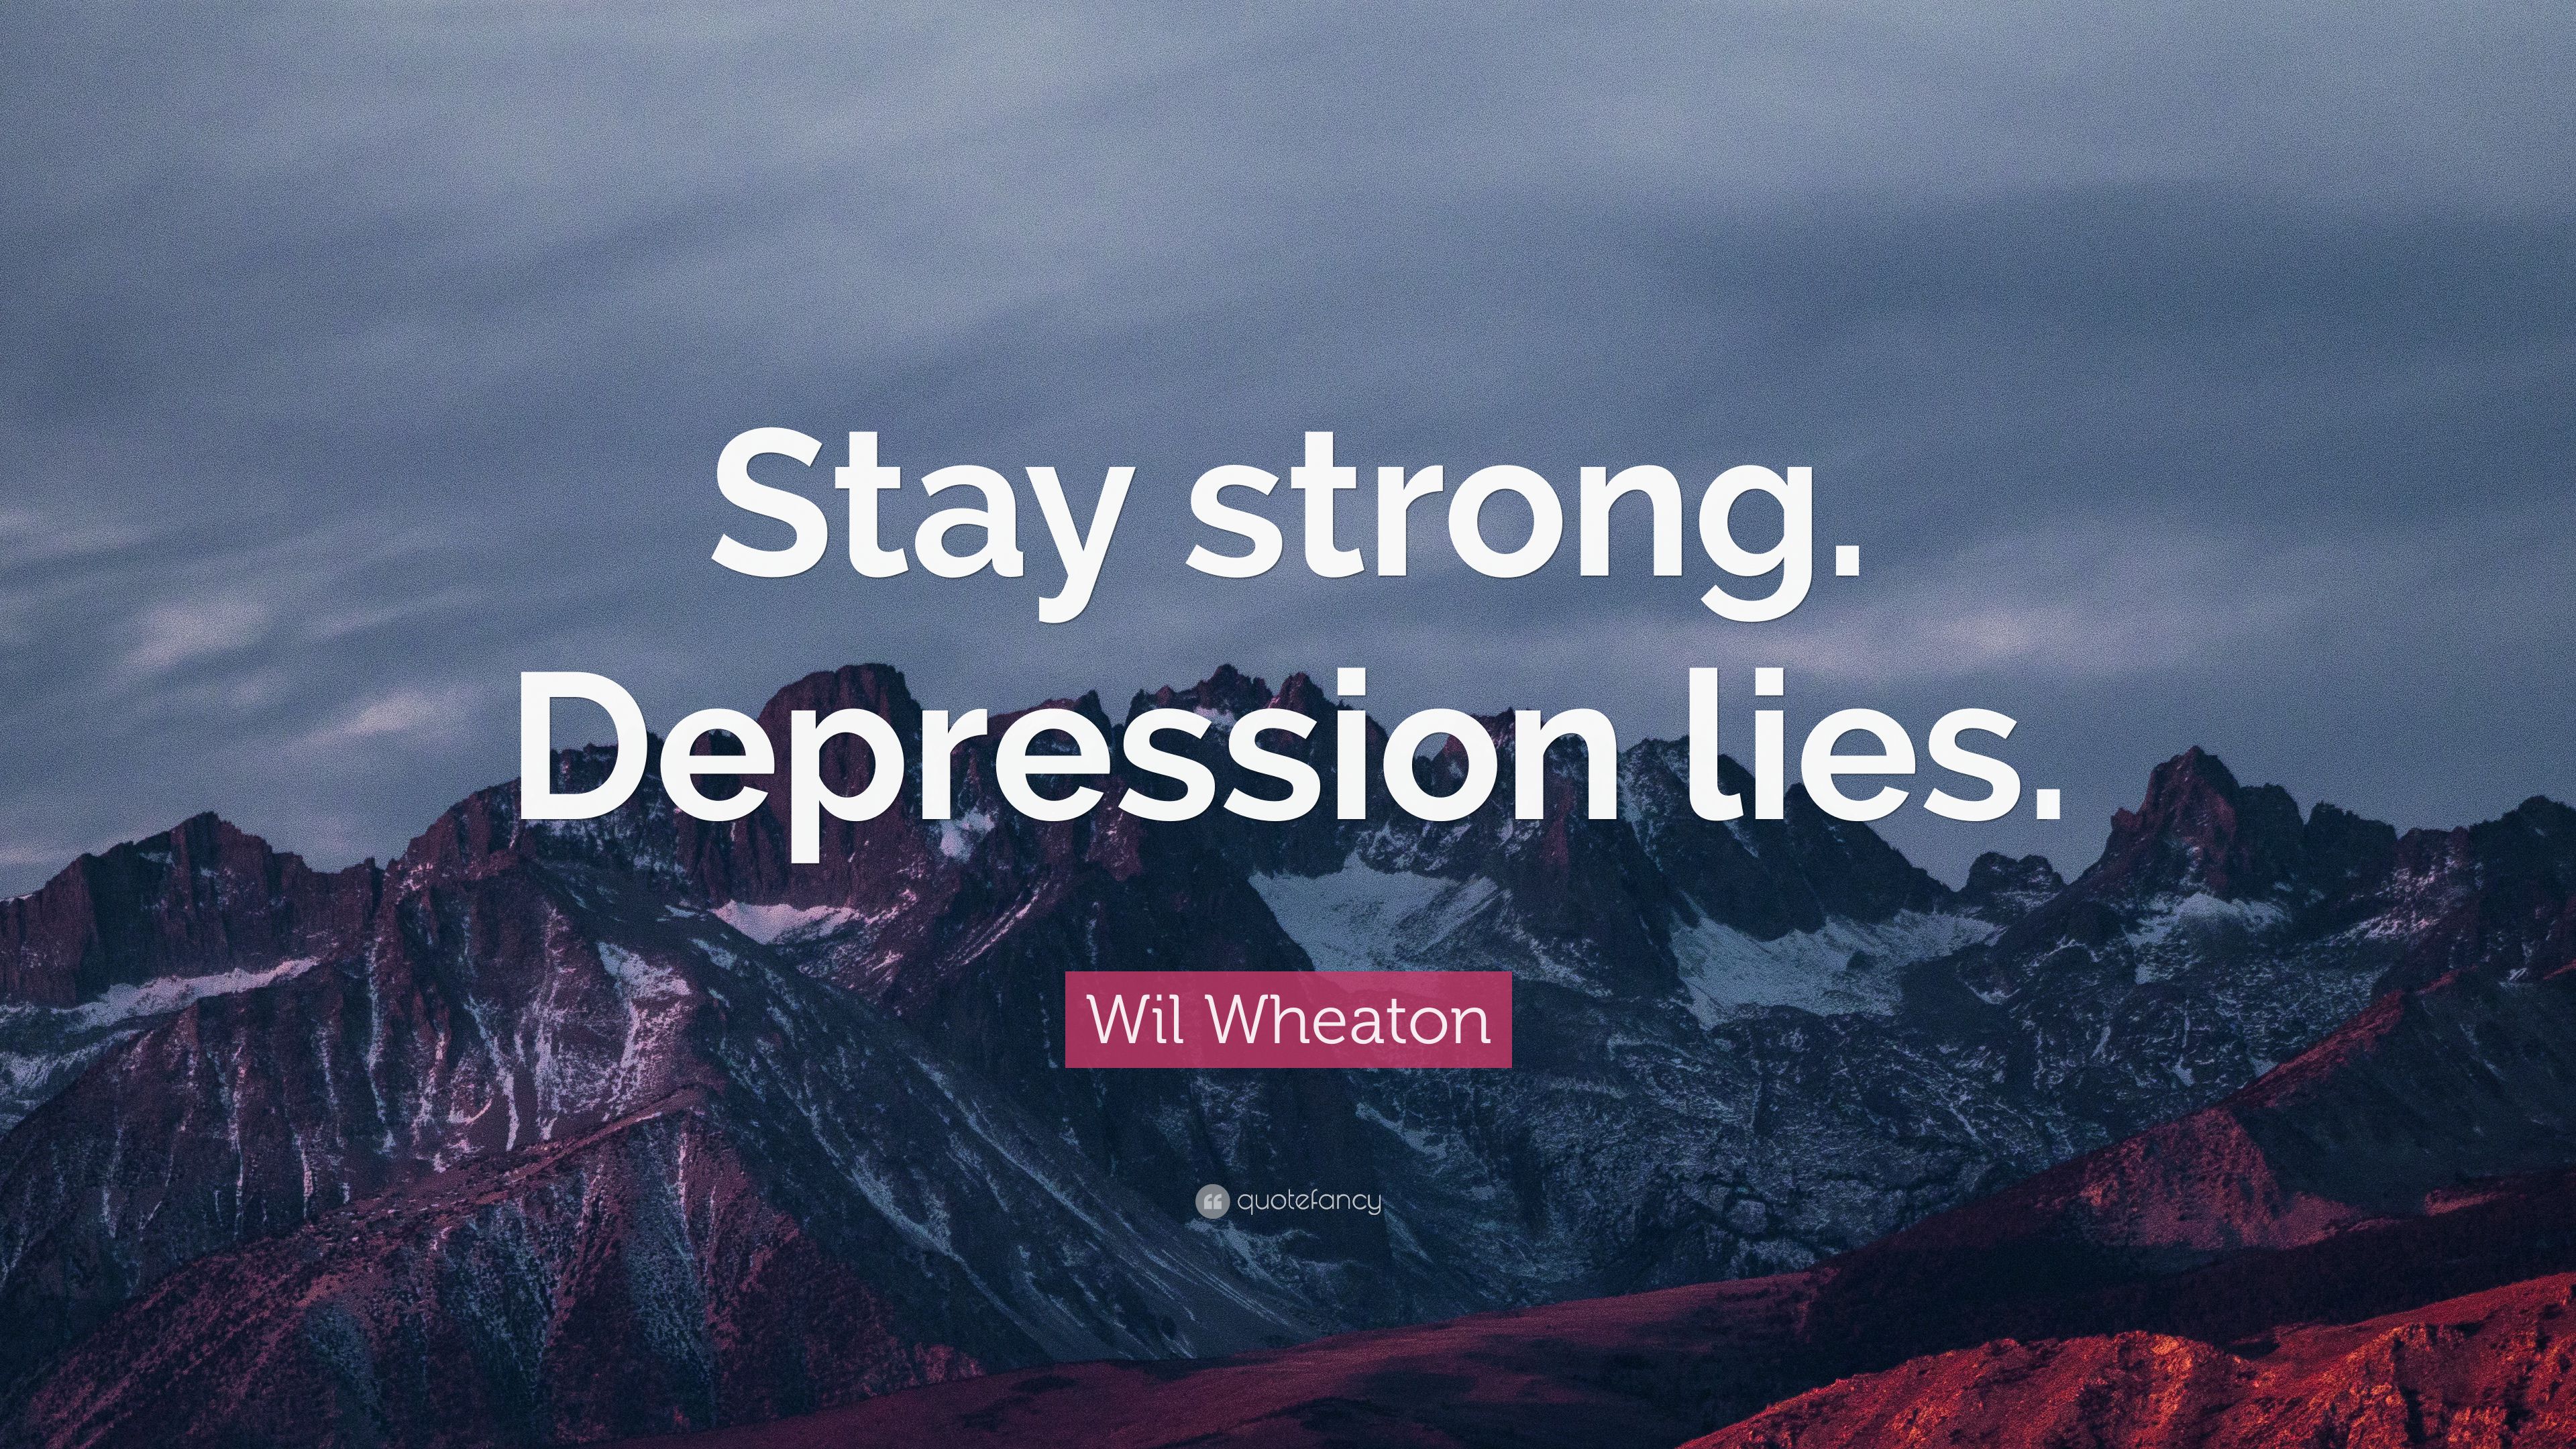 Wil Wheaton Quote: “Stay strong. Depression lies.” (12 wallpaper)